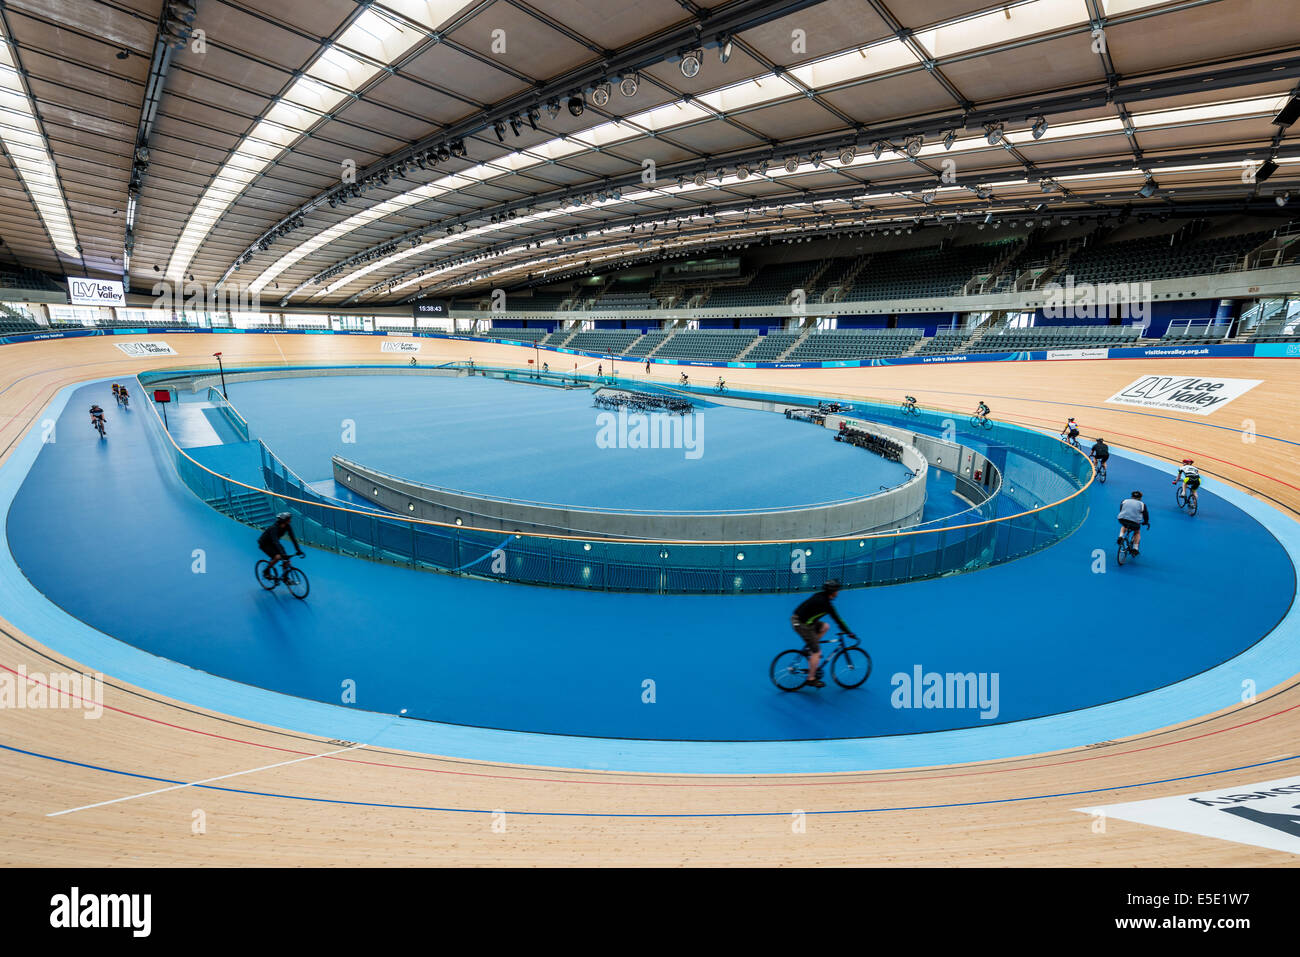 The London VeloPark (officially the Lee Valley VeloPark) is a